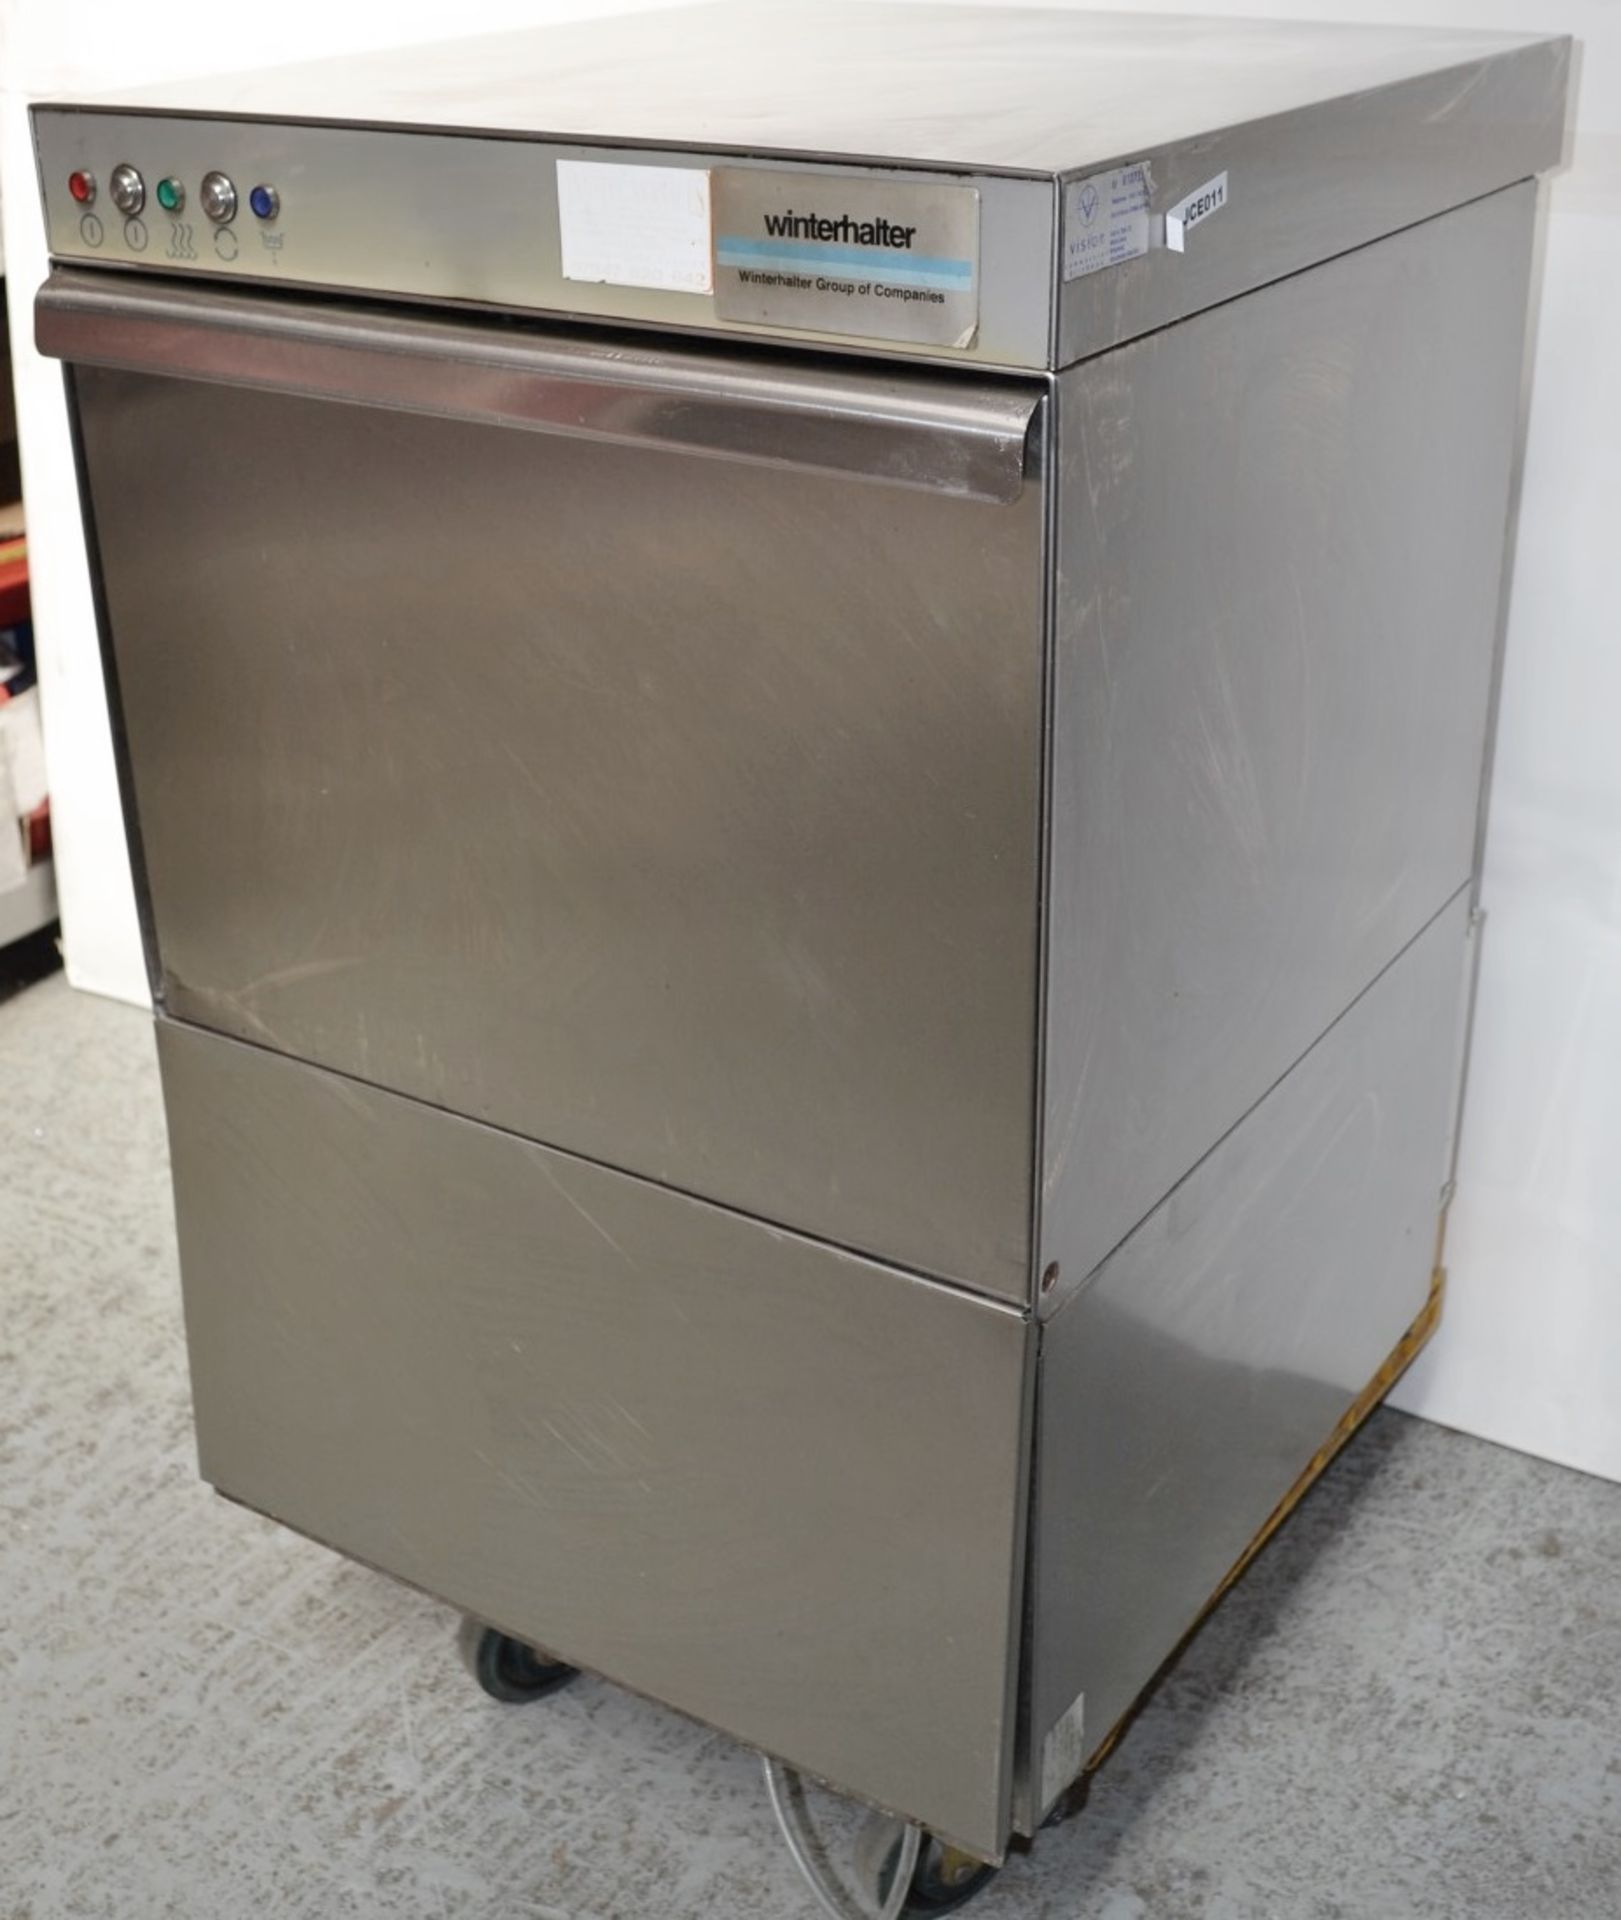 1 x Winterhalter E308-v1 Counter Height Stainless Steel Glass Washer / Dishwasher - Dimensions: D60